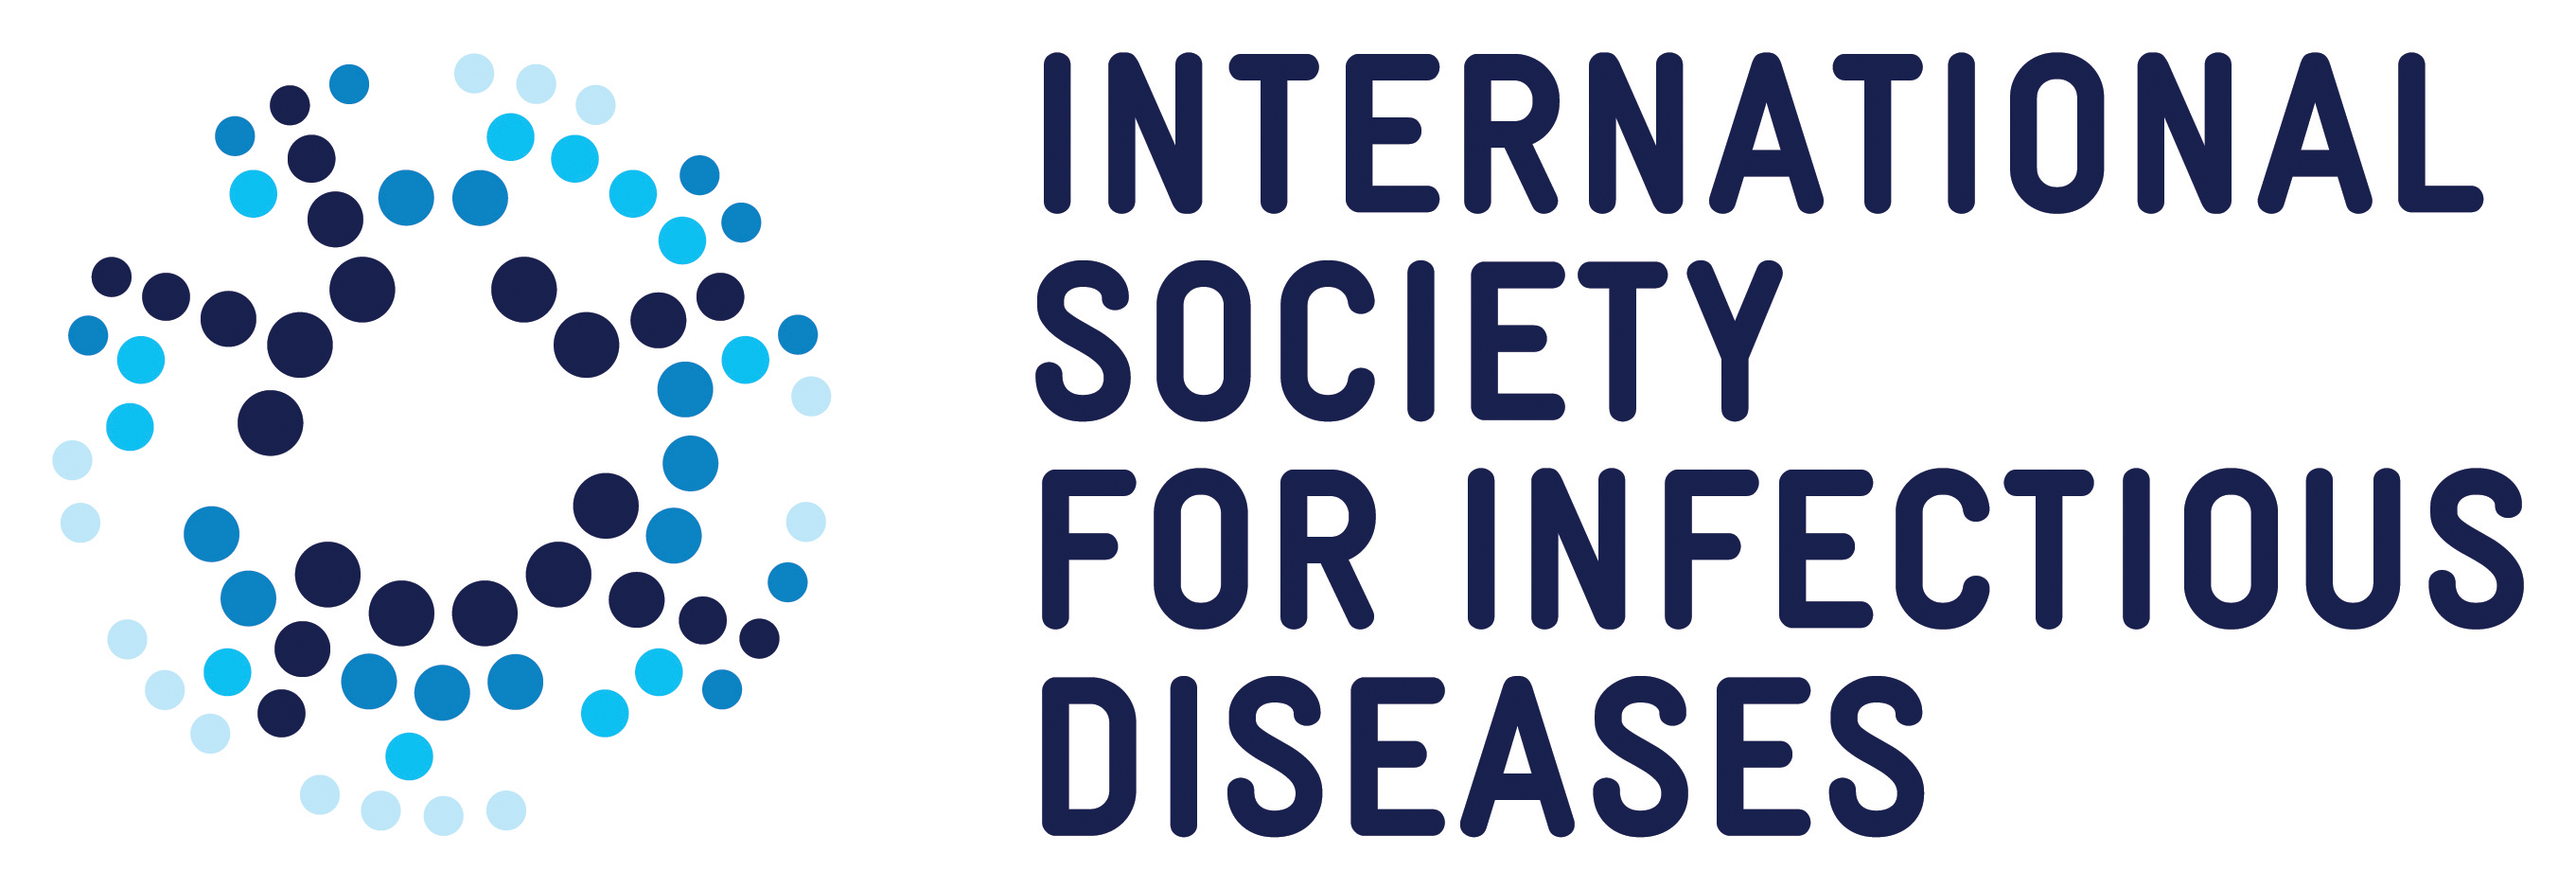 International Society for Infectious Diseases logo